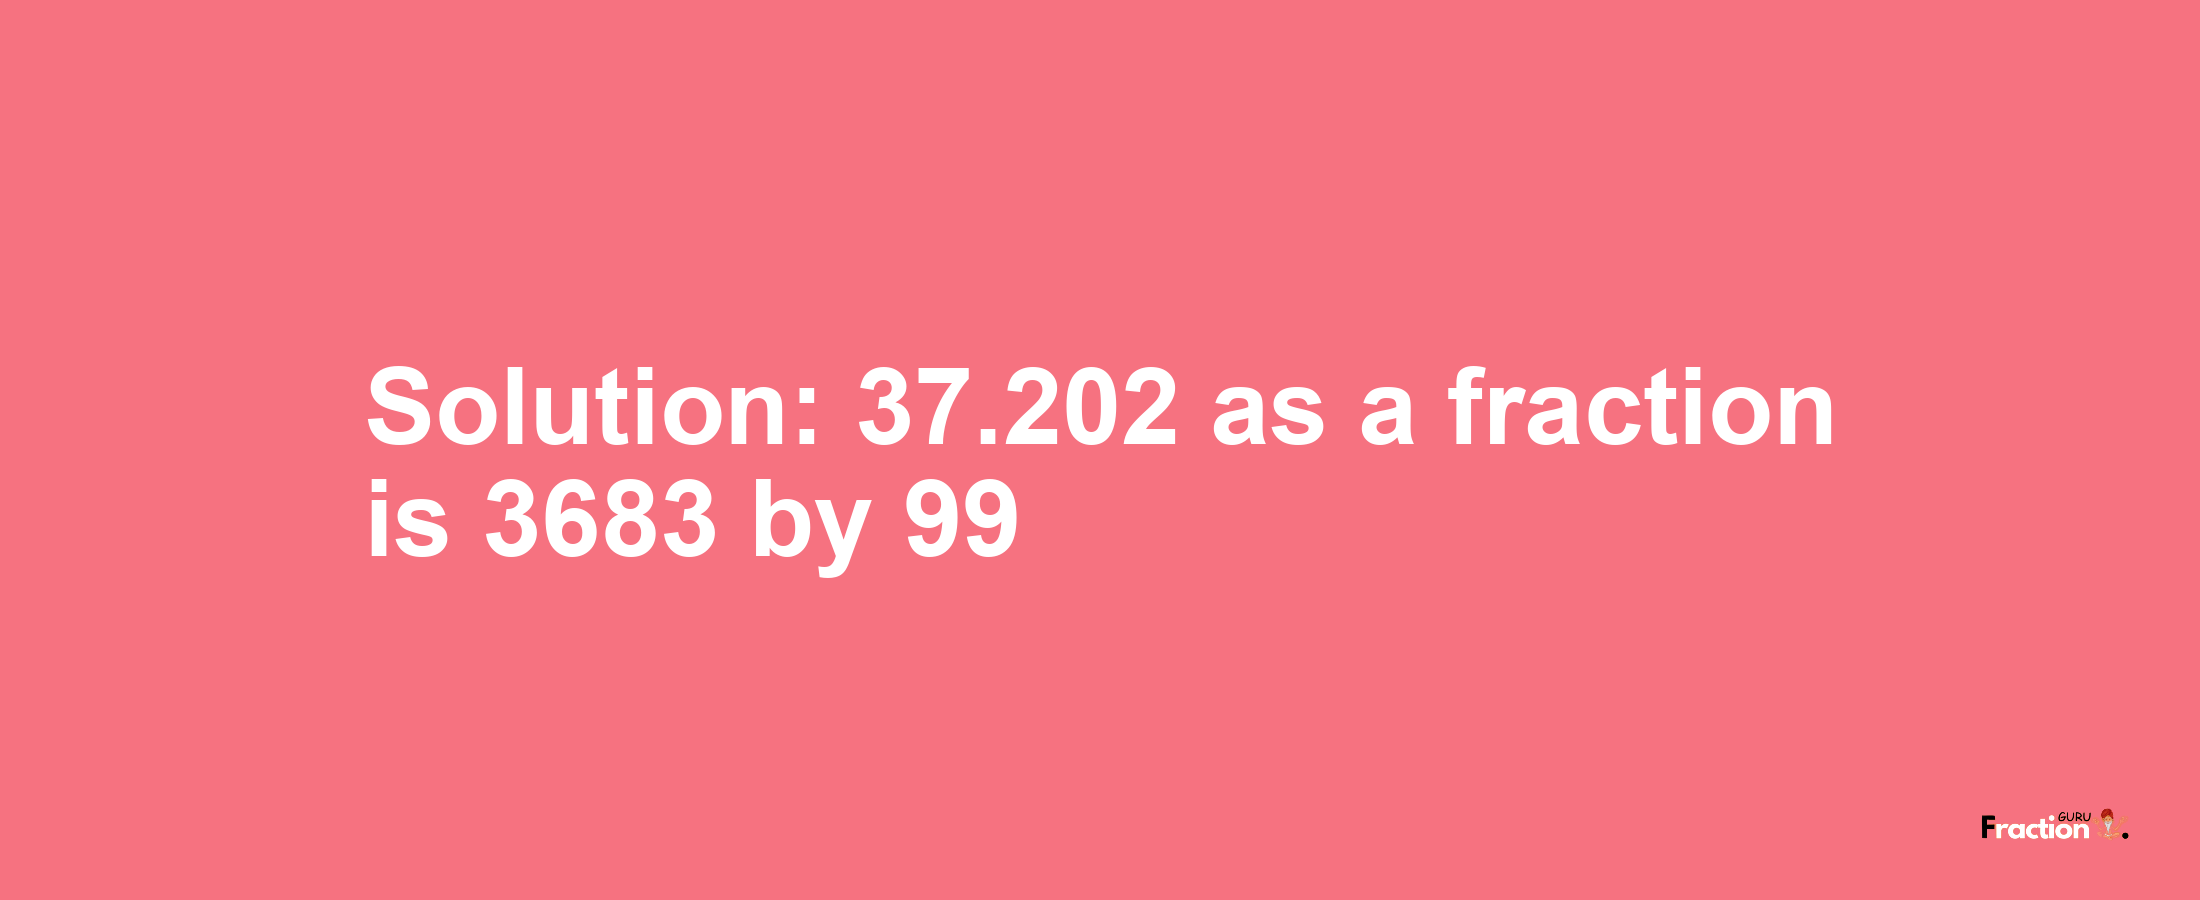 Solution:37.202 as a fraction is 3683/99